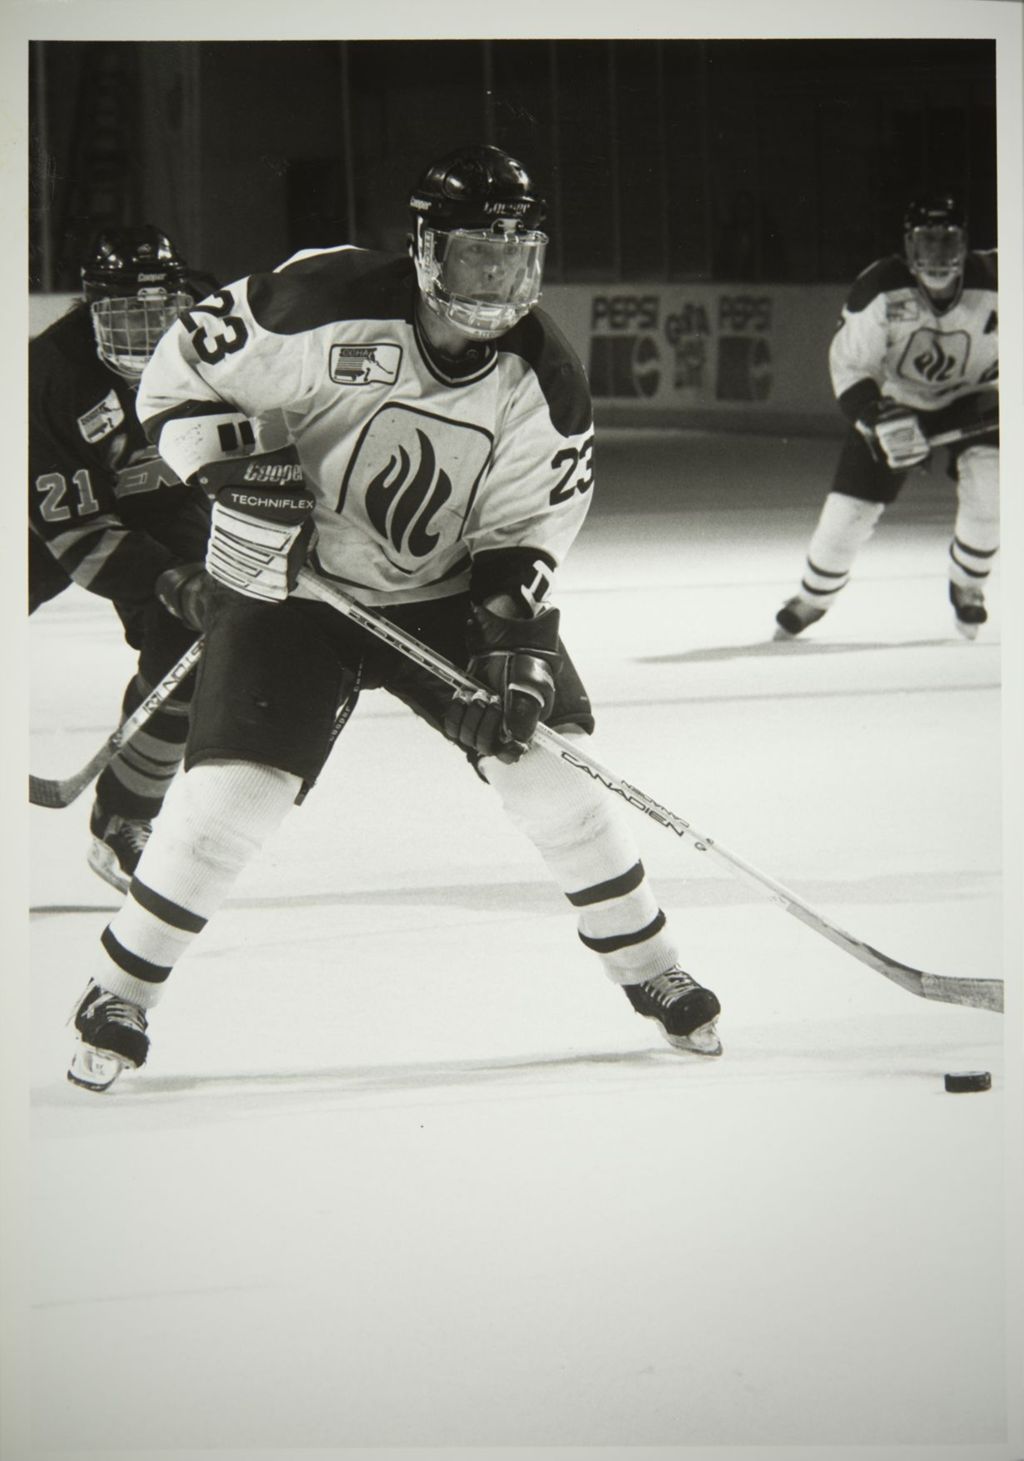 Miniature of Hockey game against Kent State University